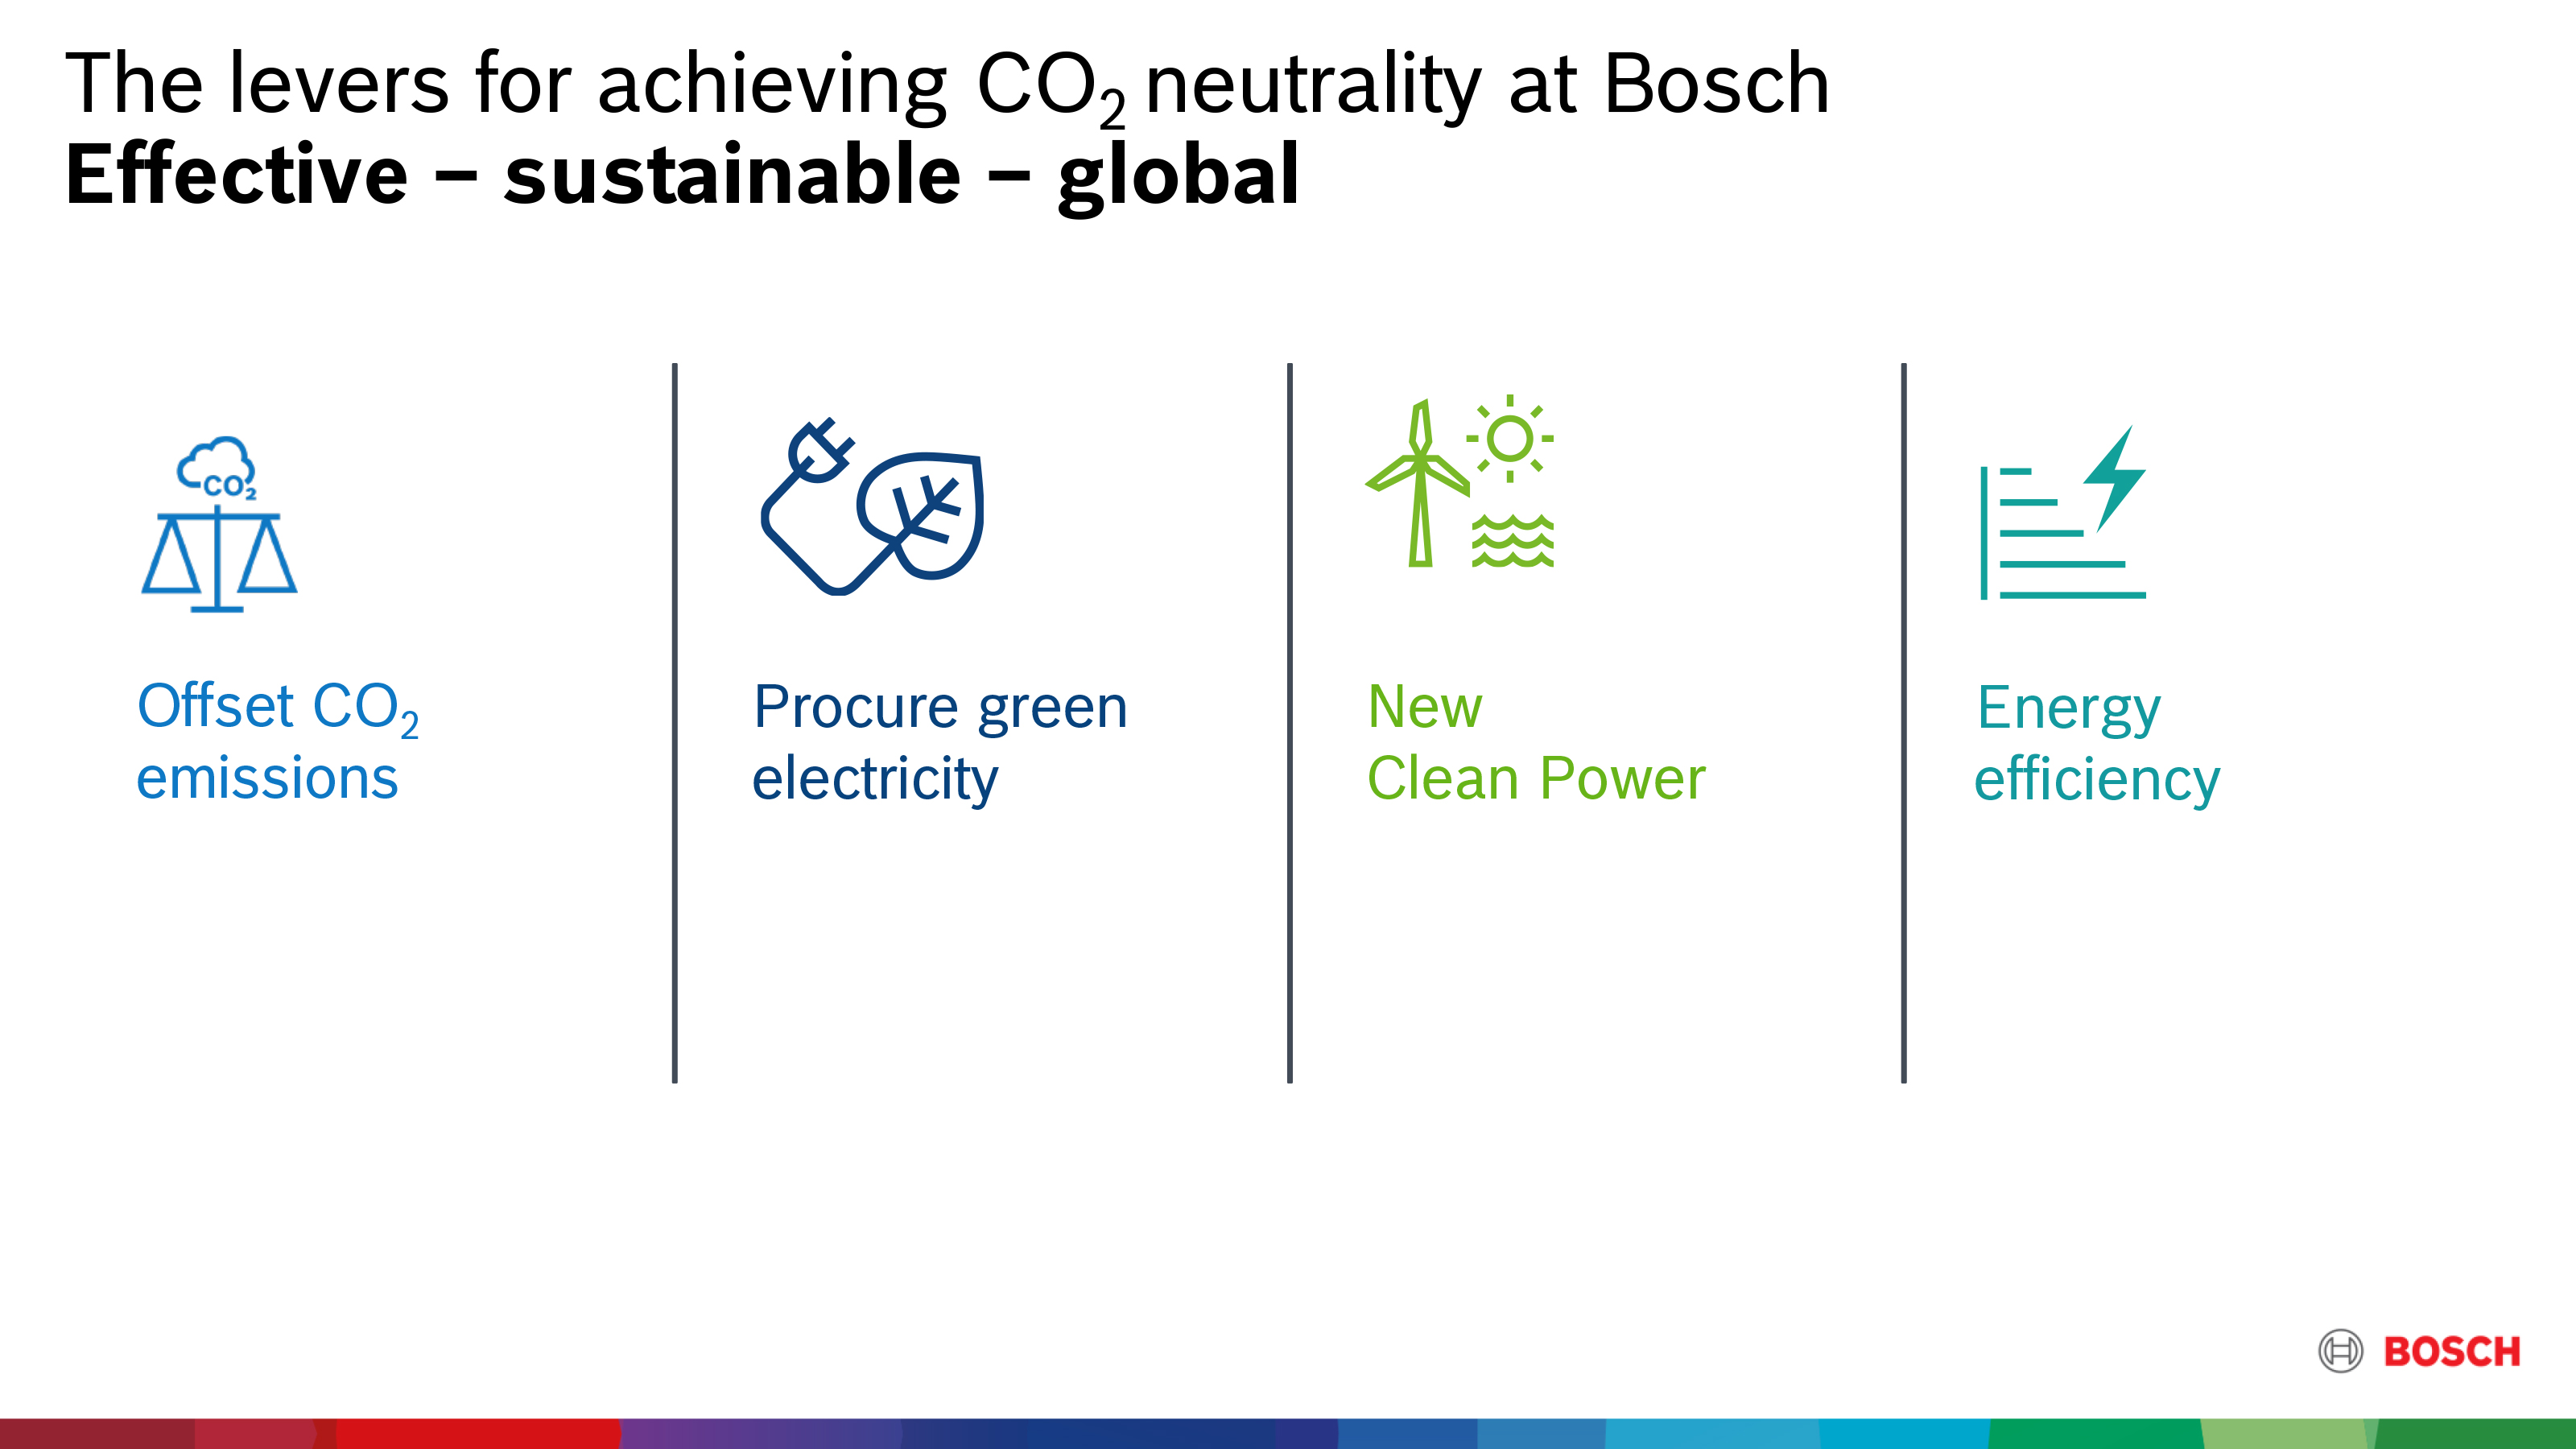 The levers to achieve CO₂-neutrality at Bosch.